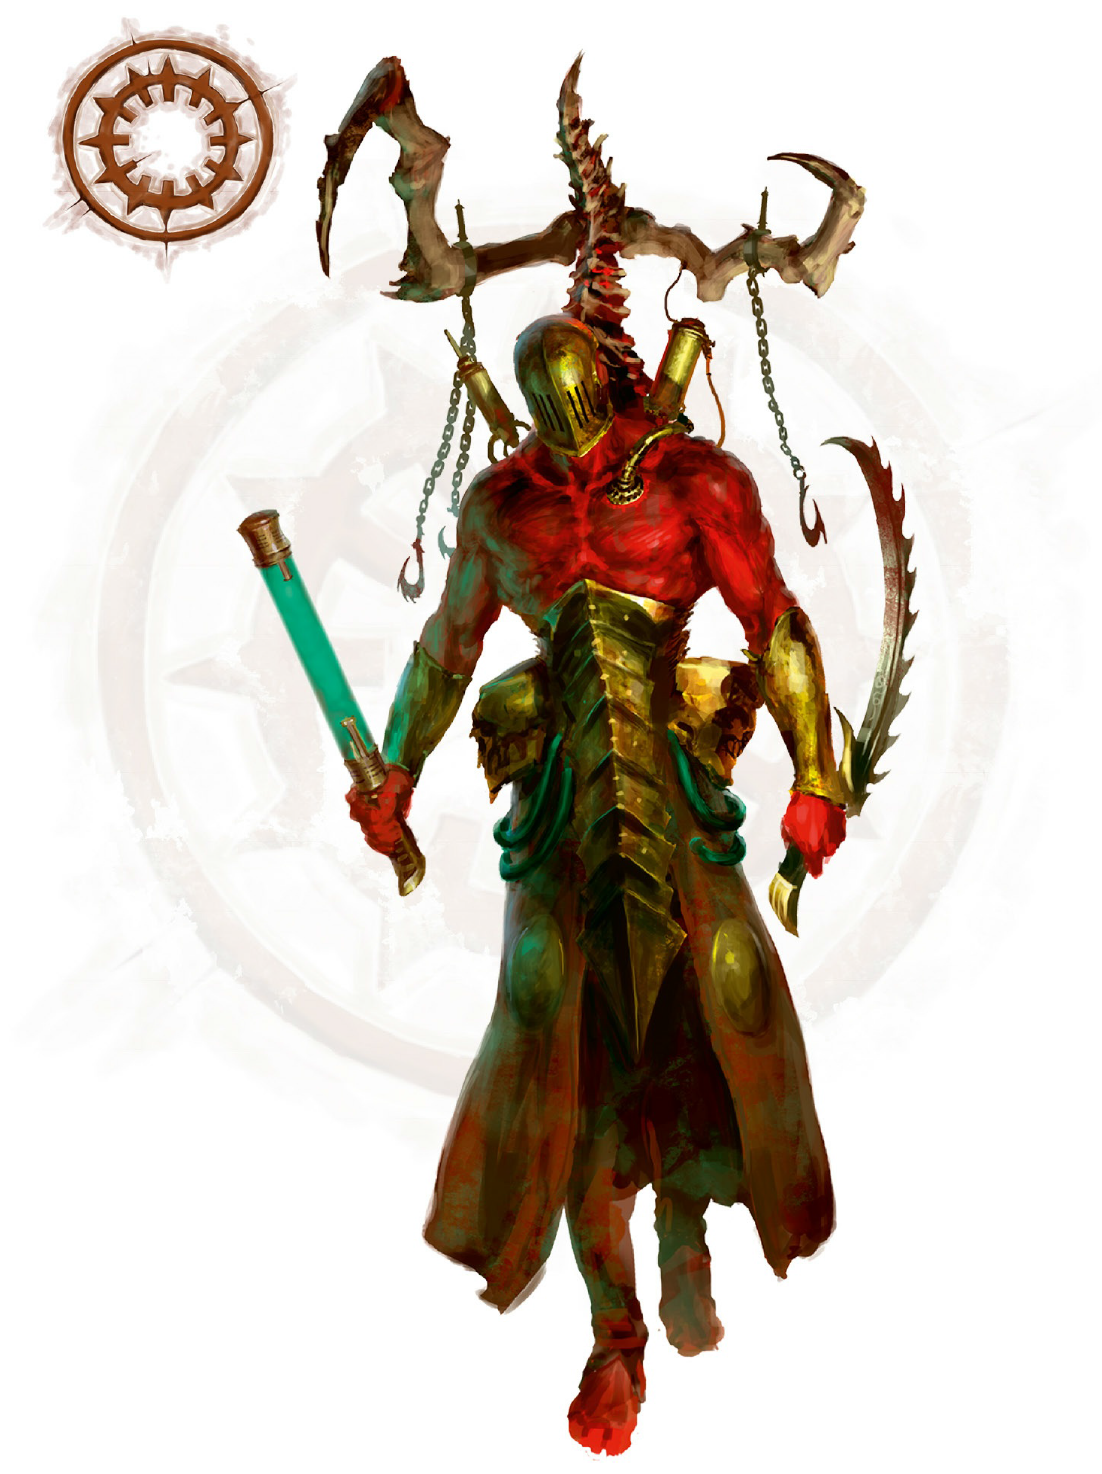 Warhammer 40K Factions: The Deadly Haemonculus Covens